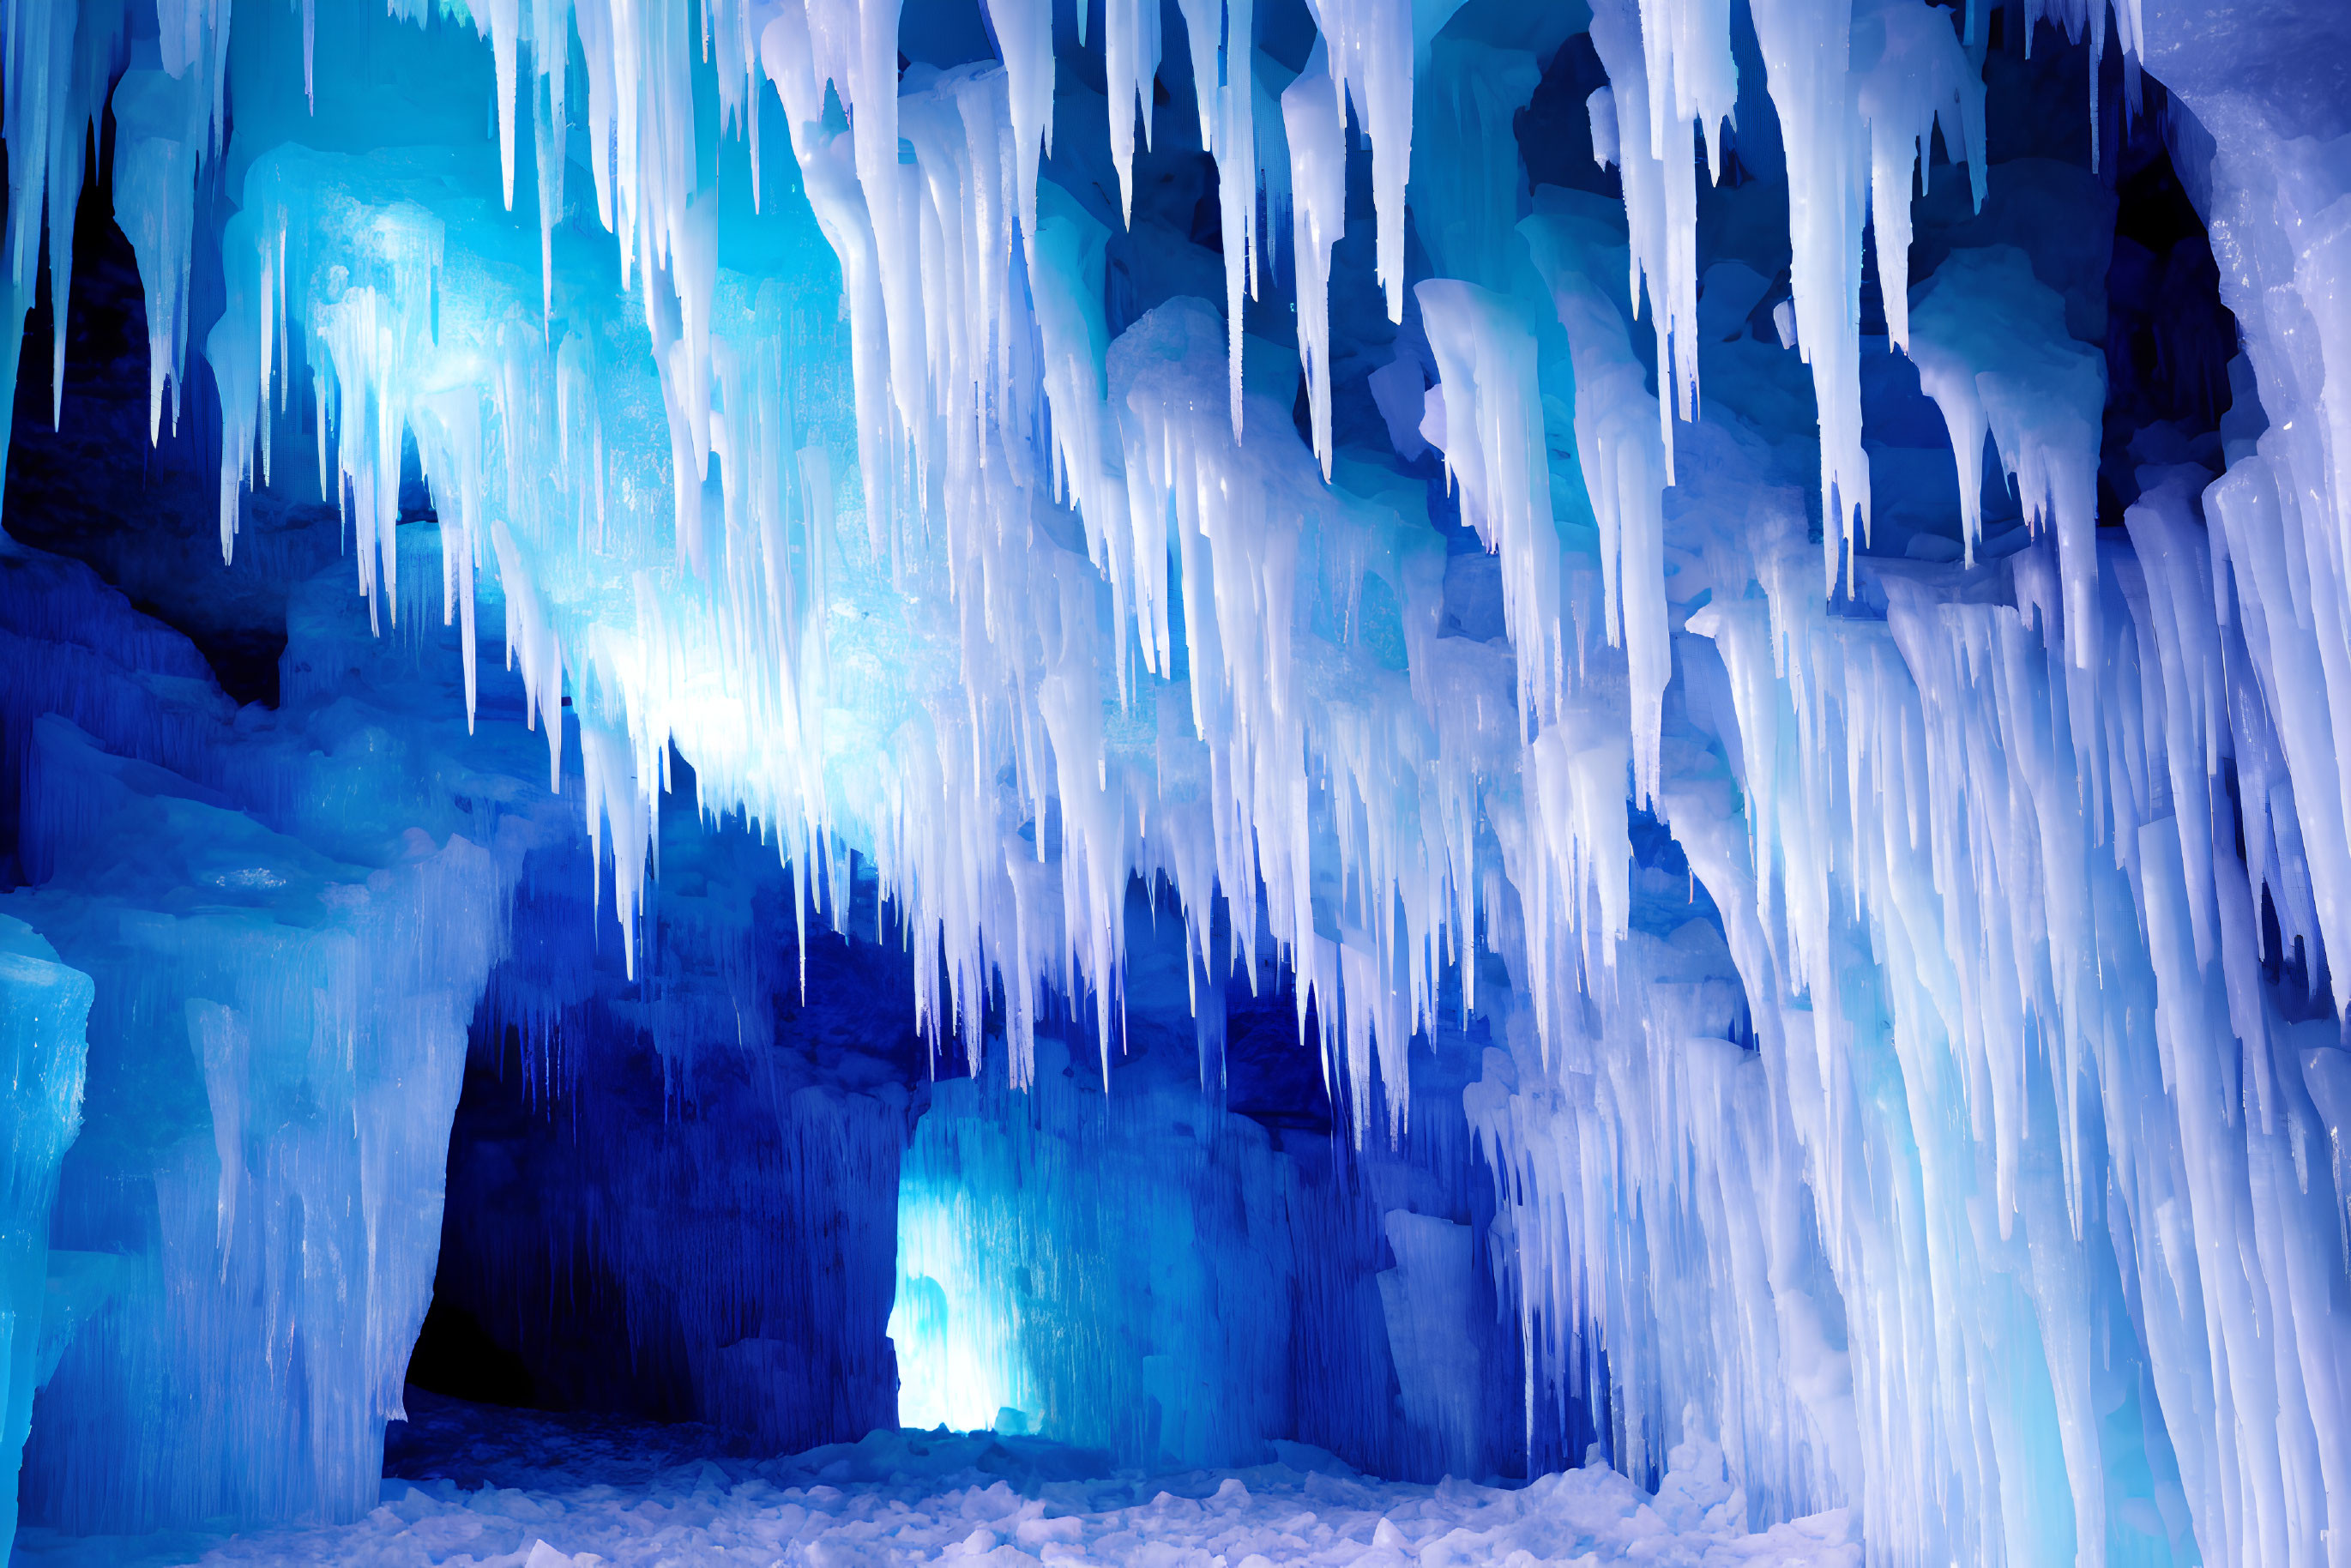 Blue-walled ice cave with hanging icicles and soft light